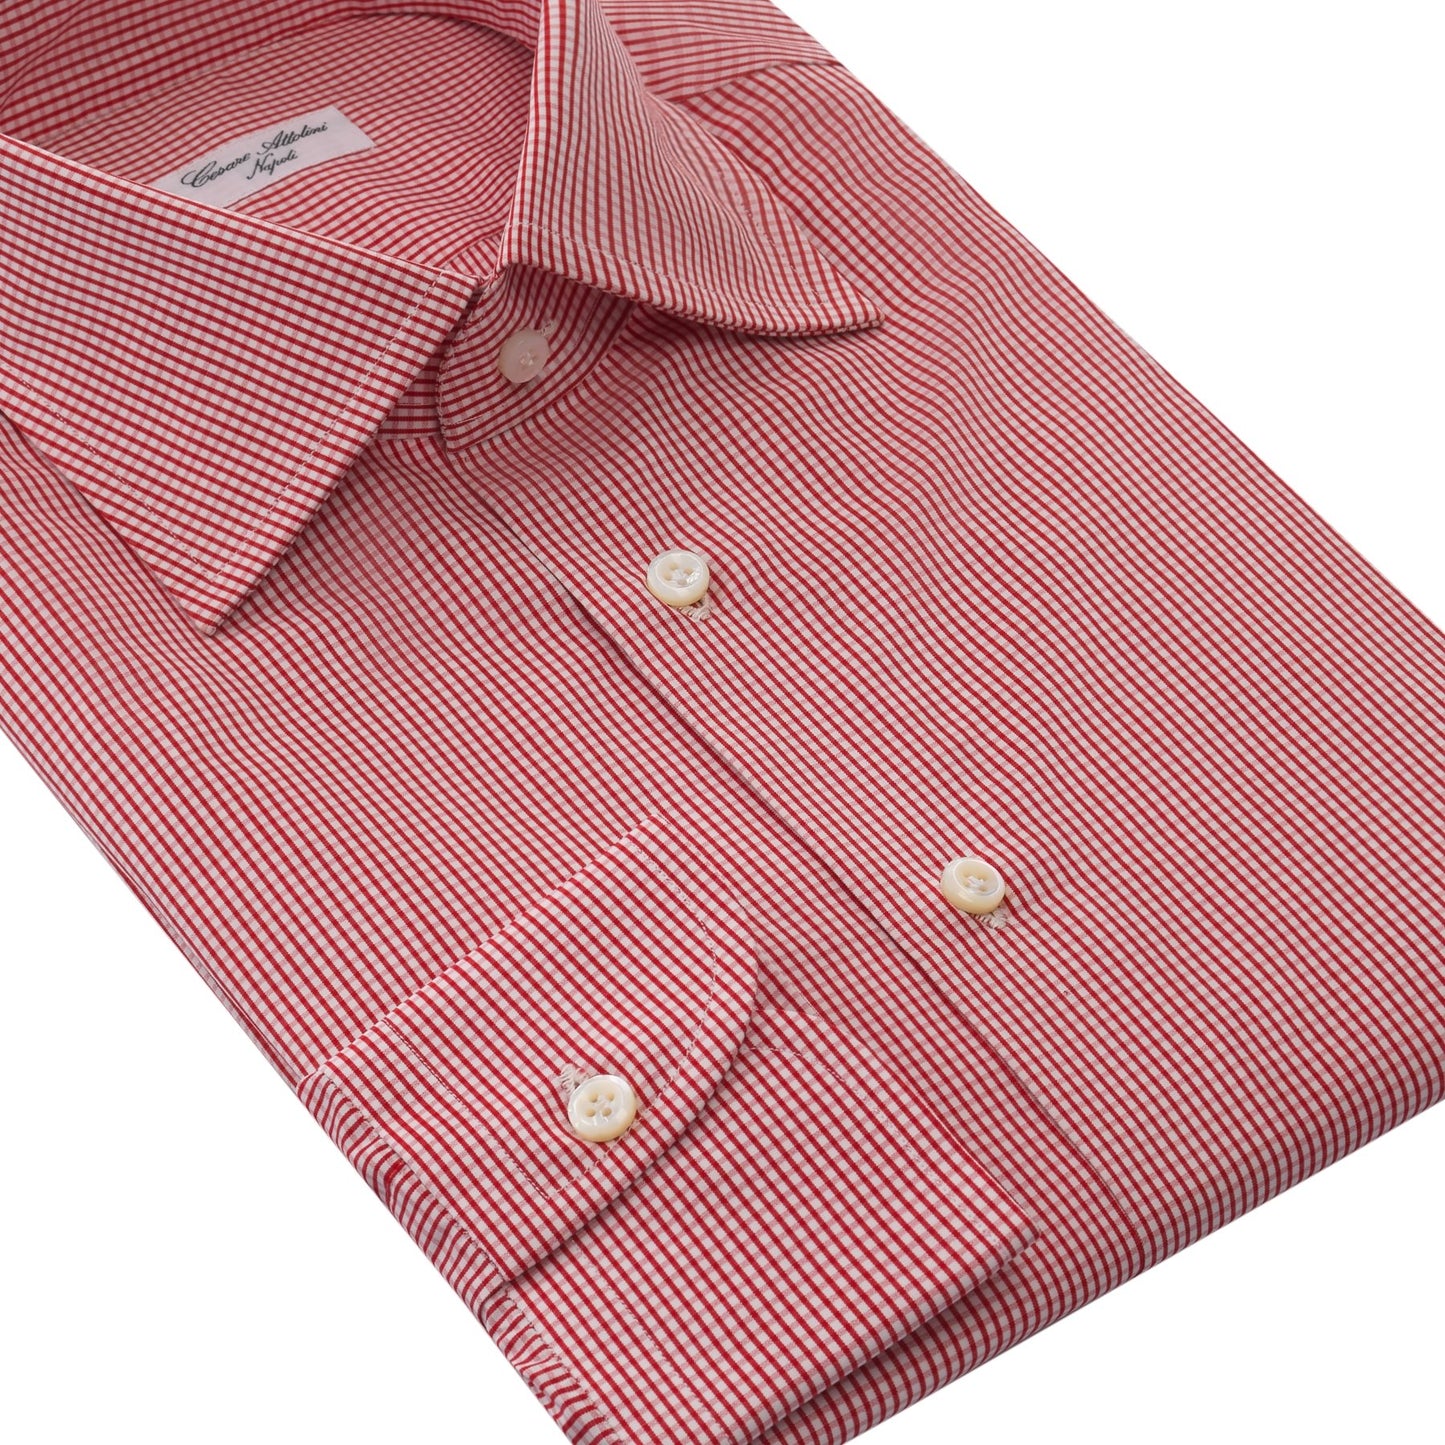 Cesare Attolini Gingham Cotton Shirt in Red - SARTALE